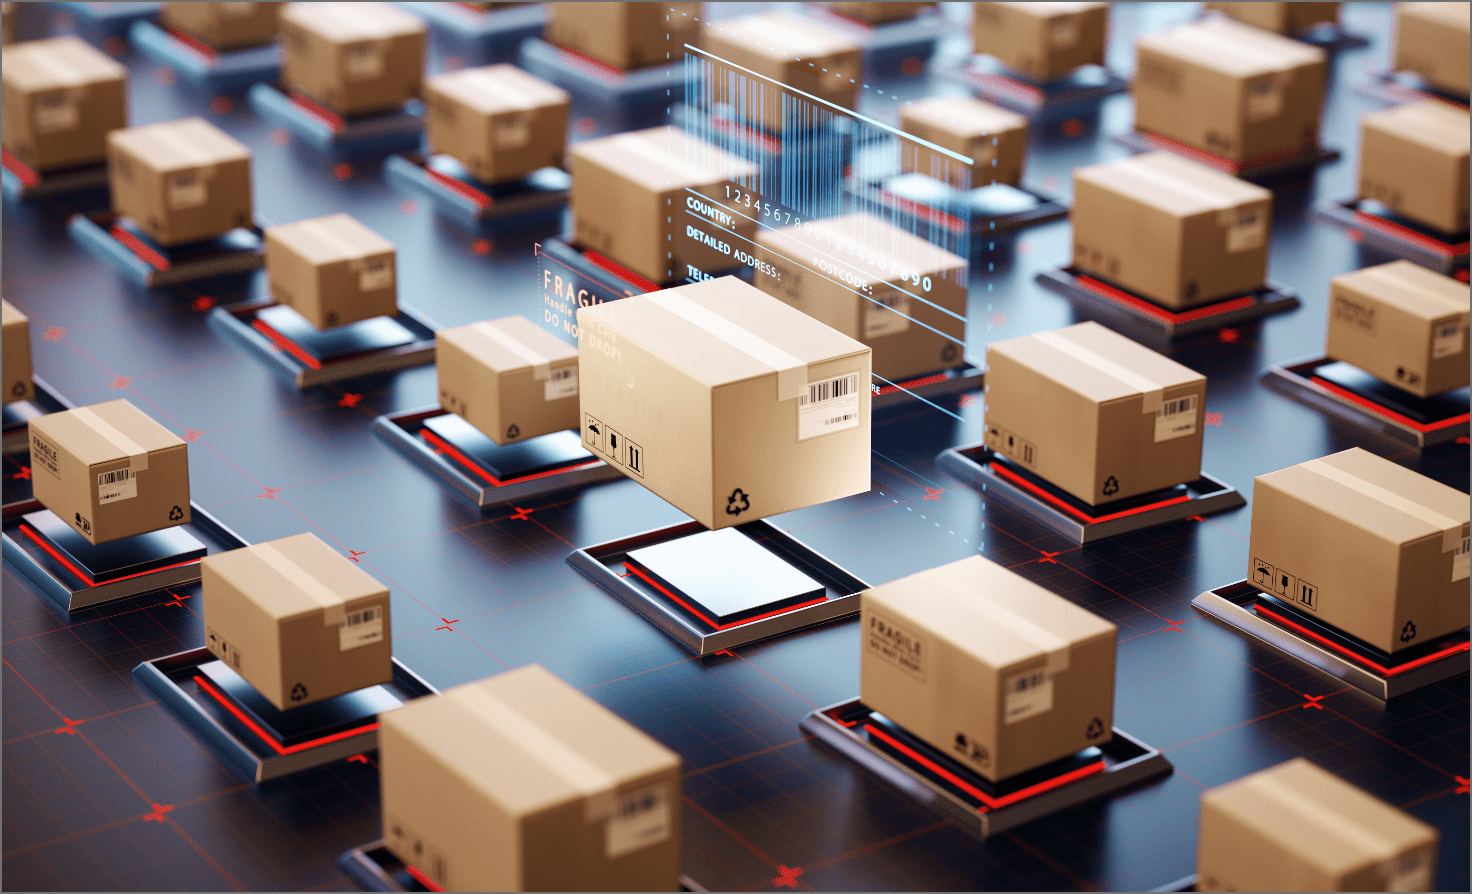 technology being used in shorting and shipping parcels